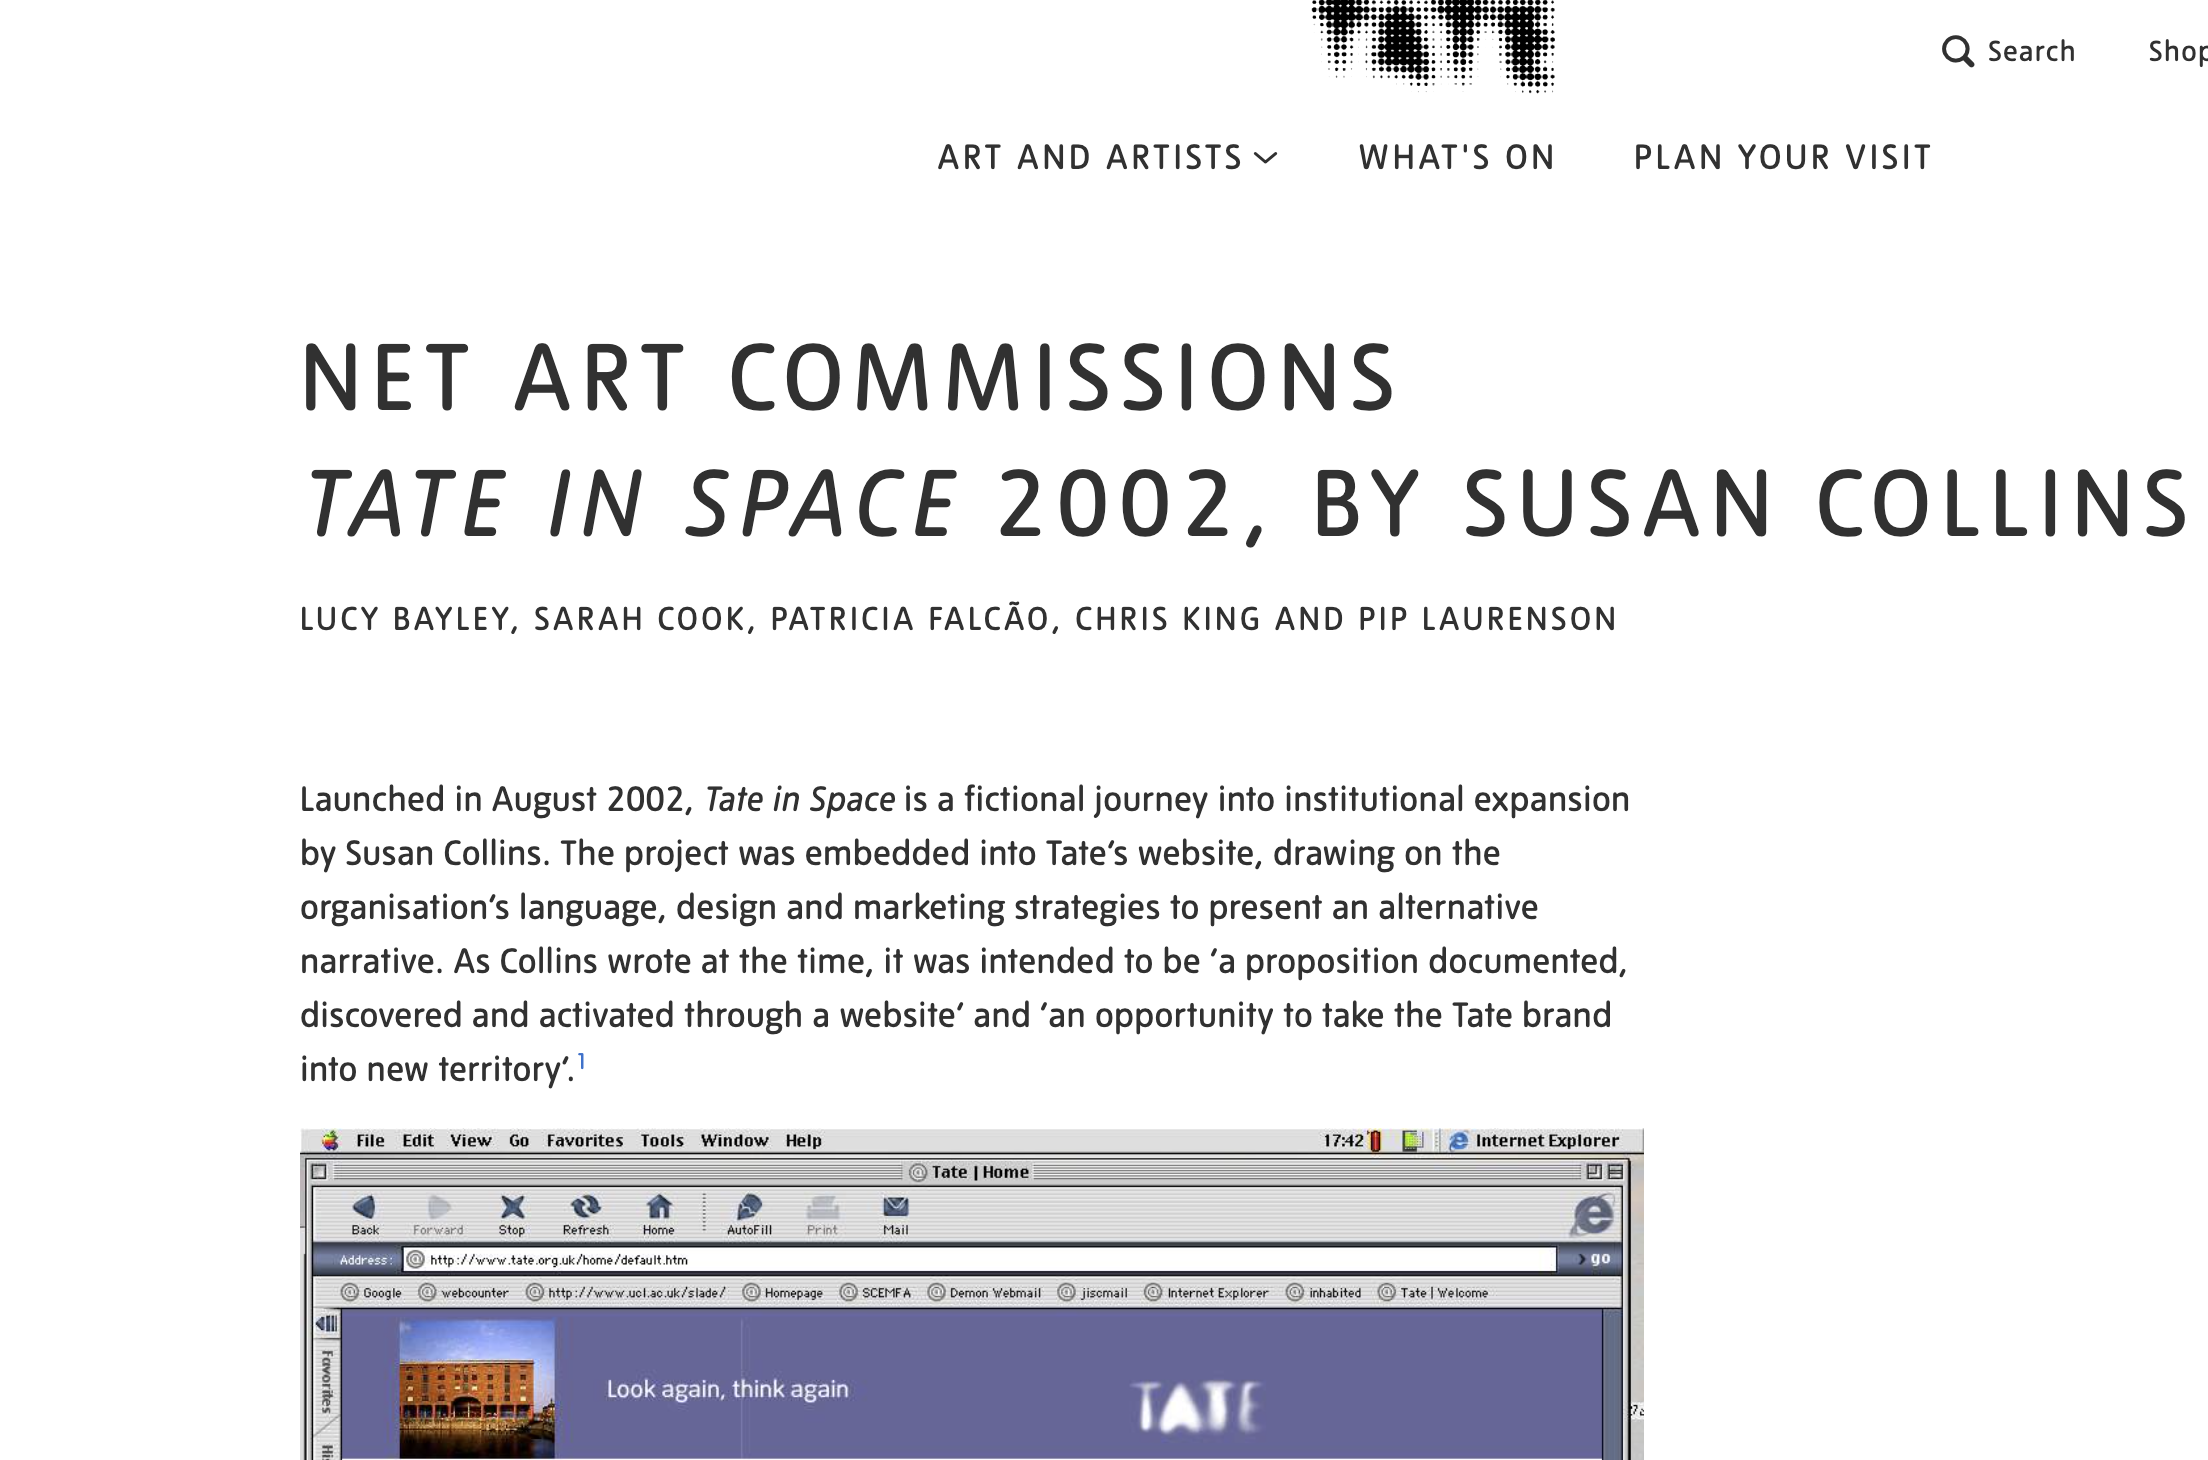 Tate text on Tate in Space for Lives of Net Art